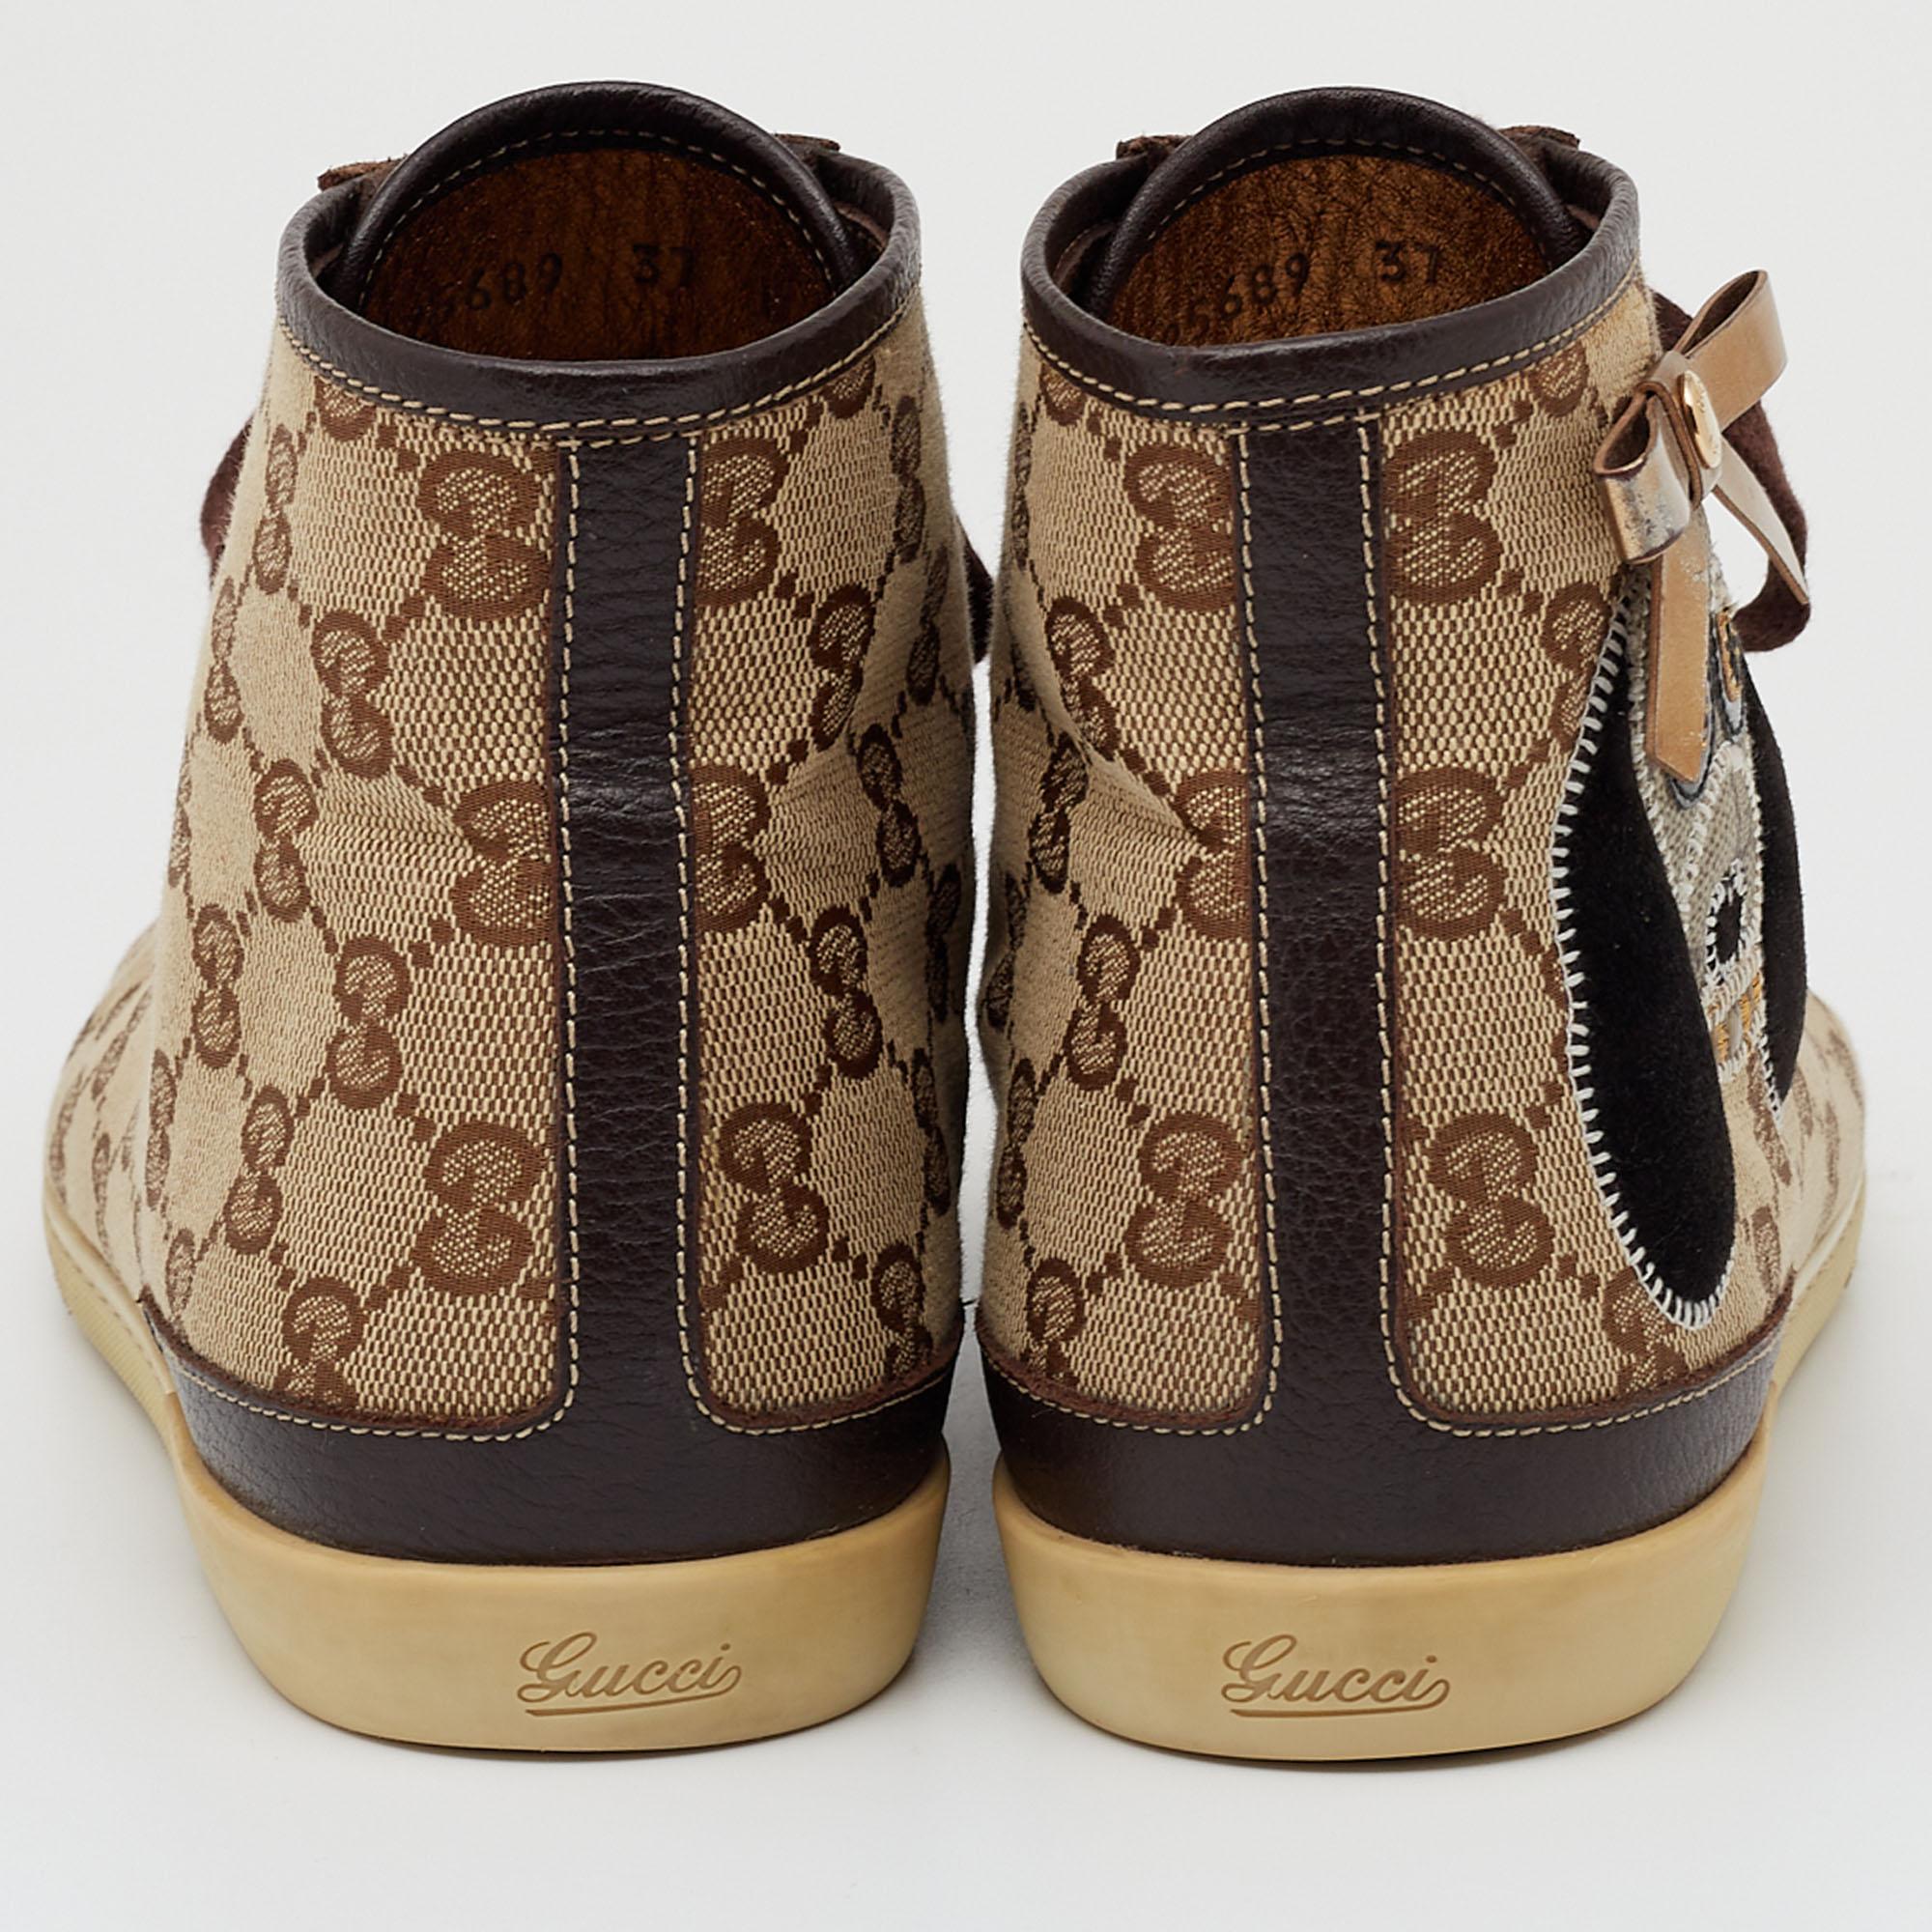 Gucci Beige/Brown Leather And GG Supreme Canvas High Top Sneakers Size 37 1